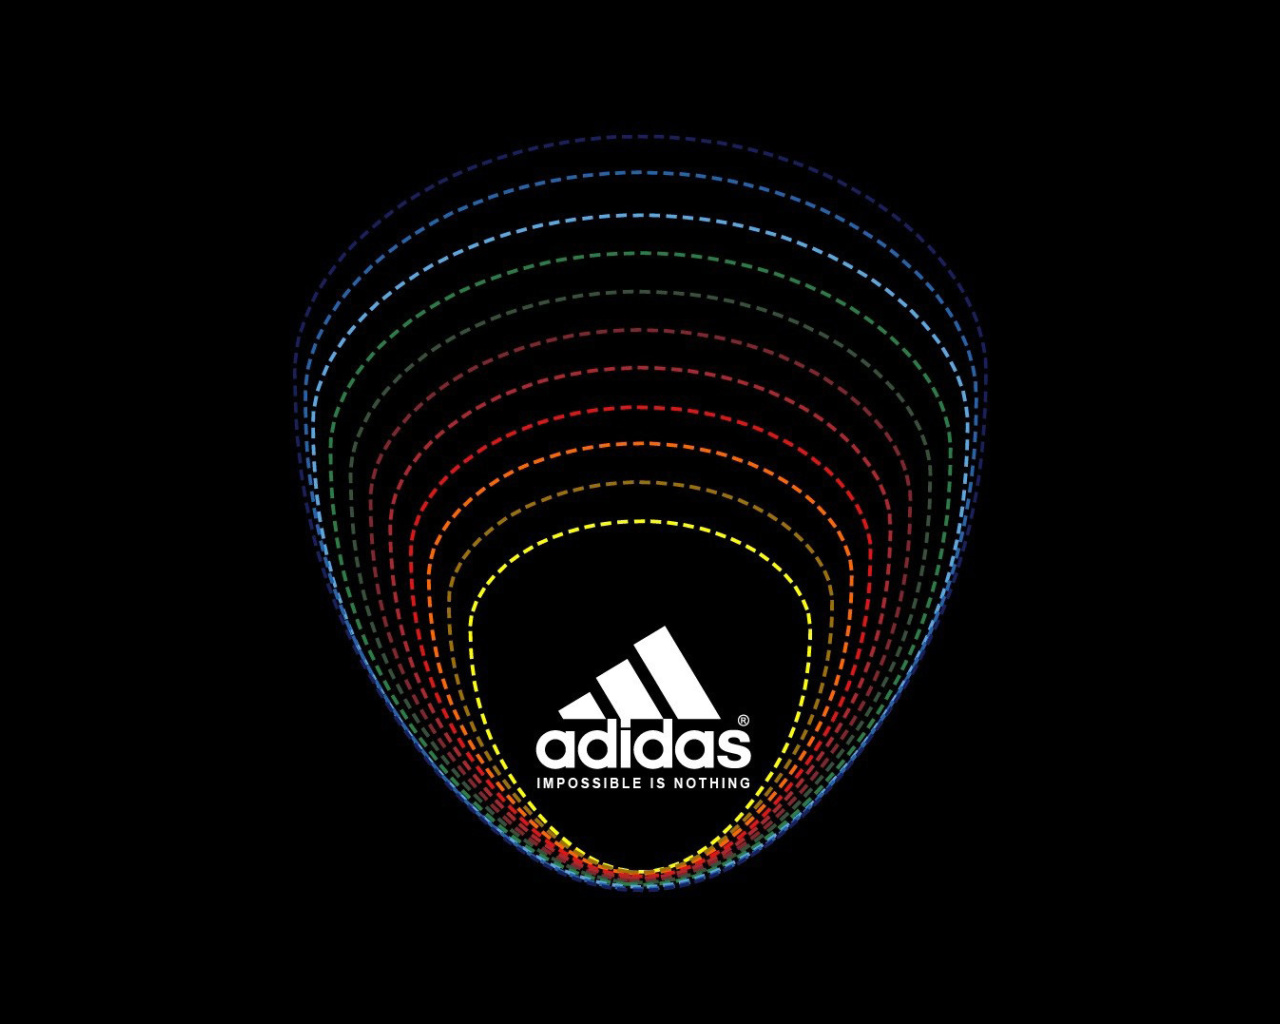 Adidas Tagline, Impossible is Nothing screenshot #1 1280x1024